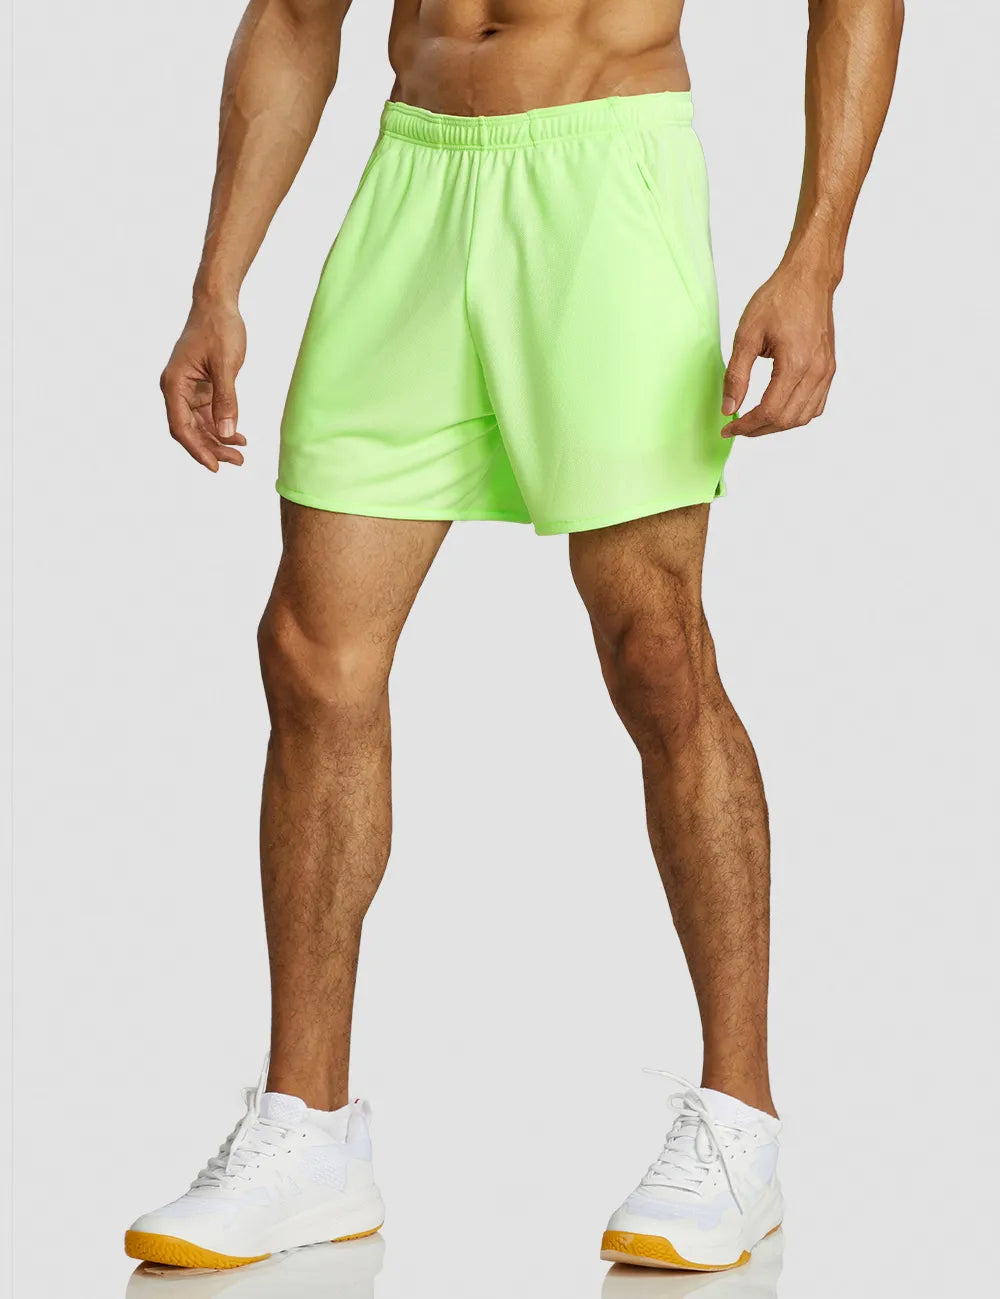 Mesh 5" Fitted Shorts